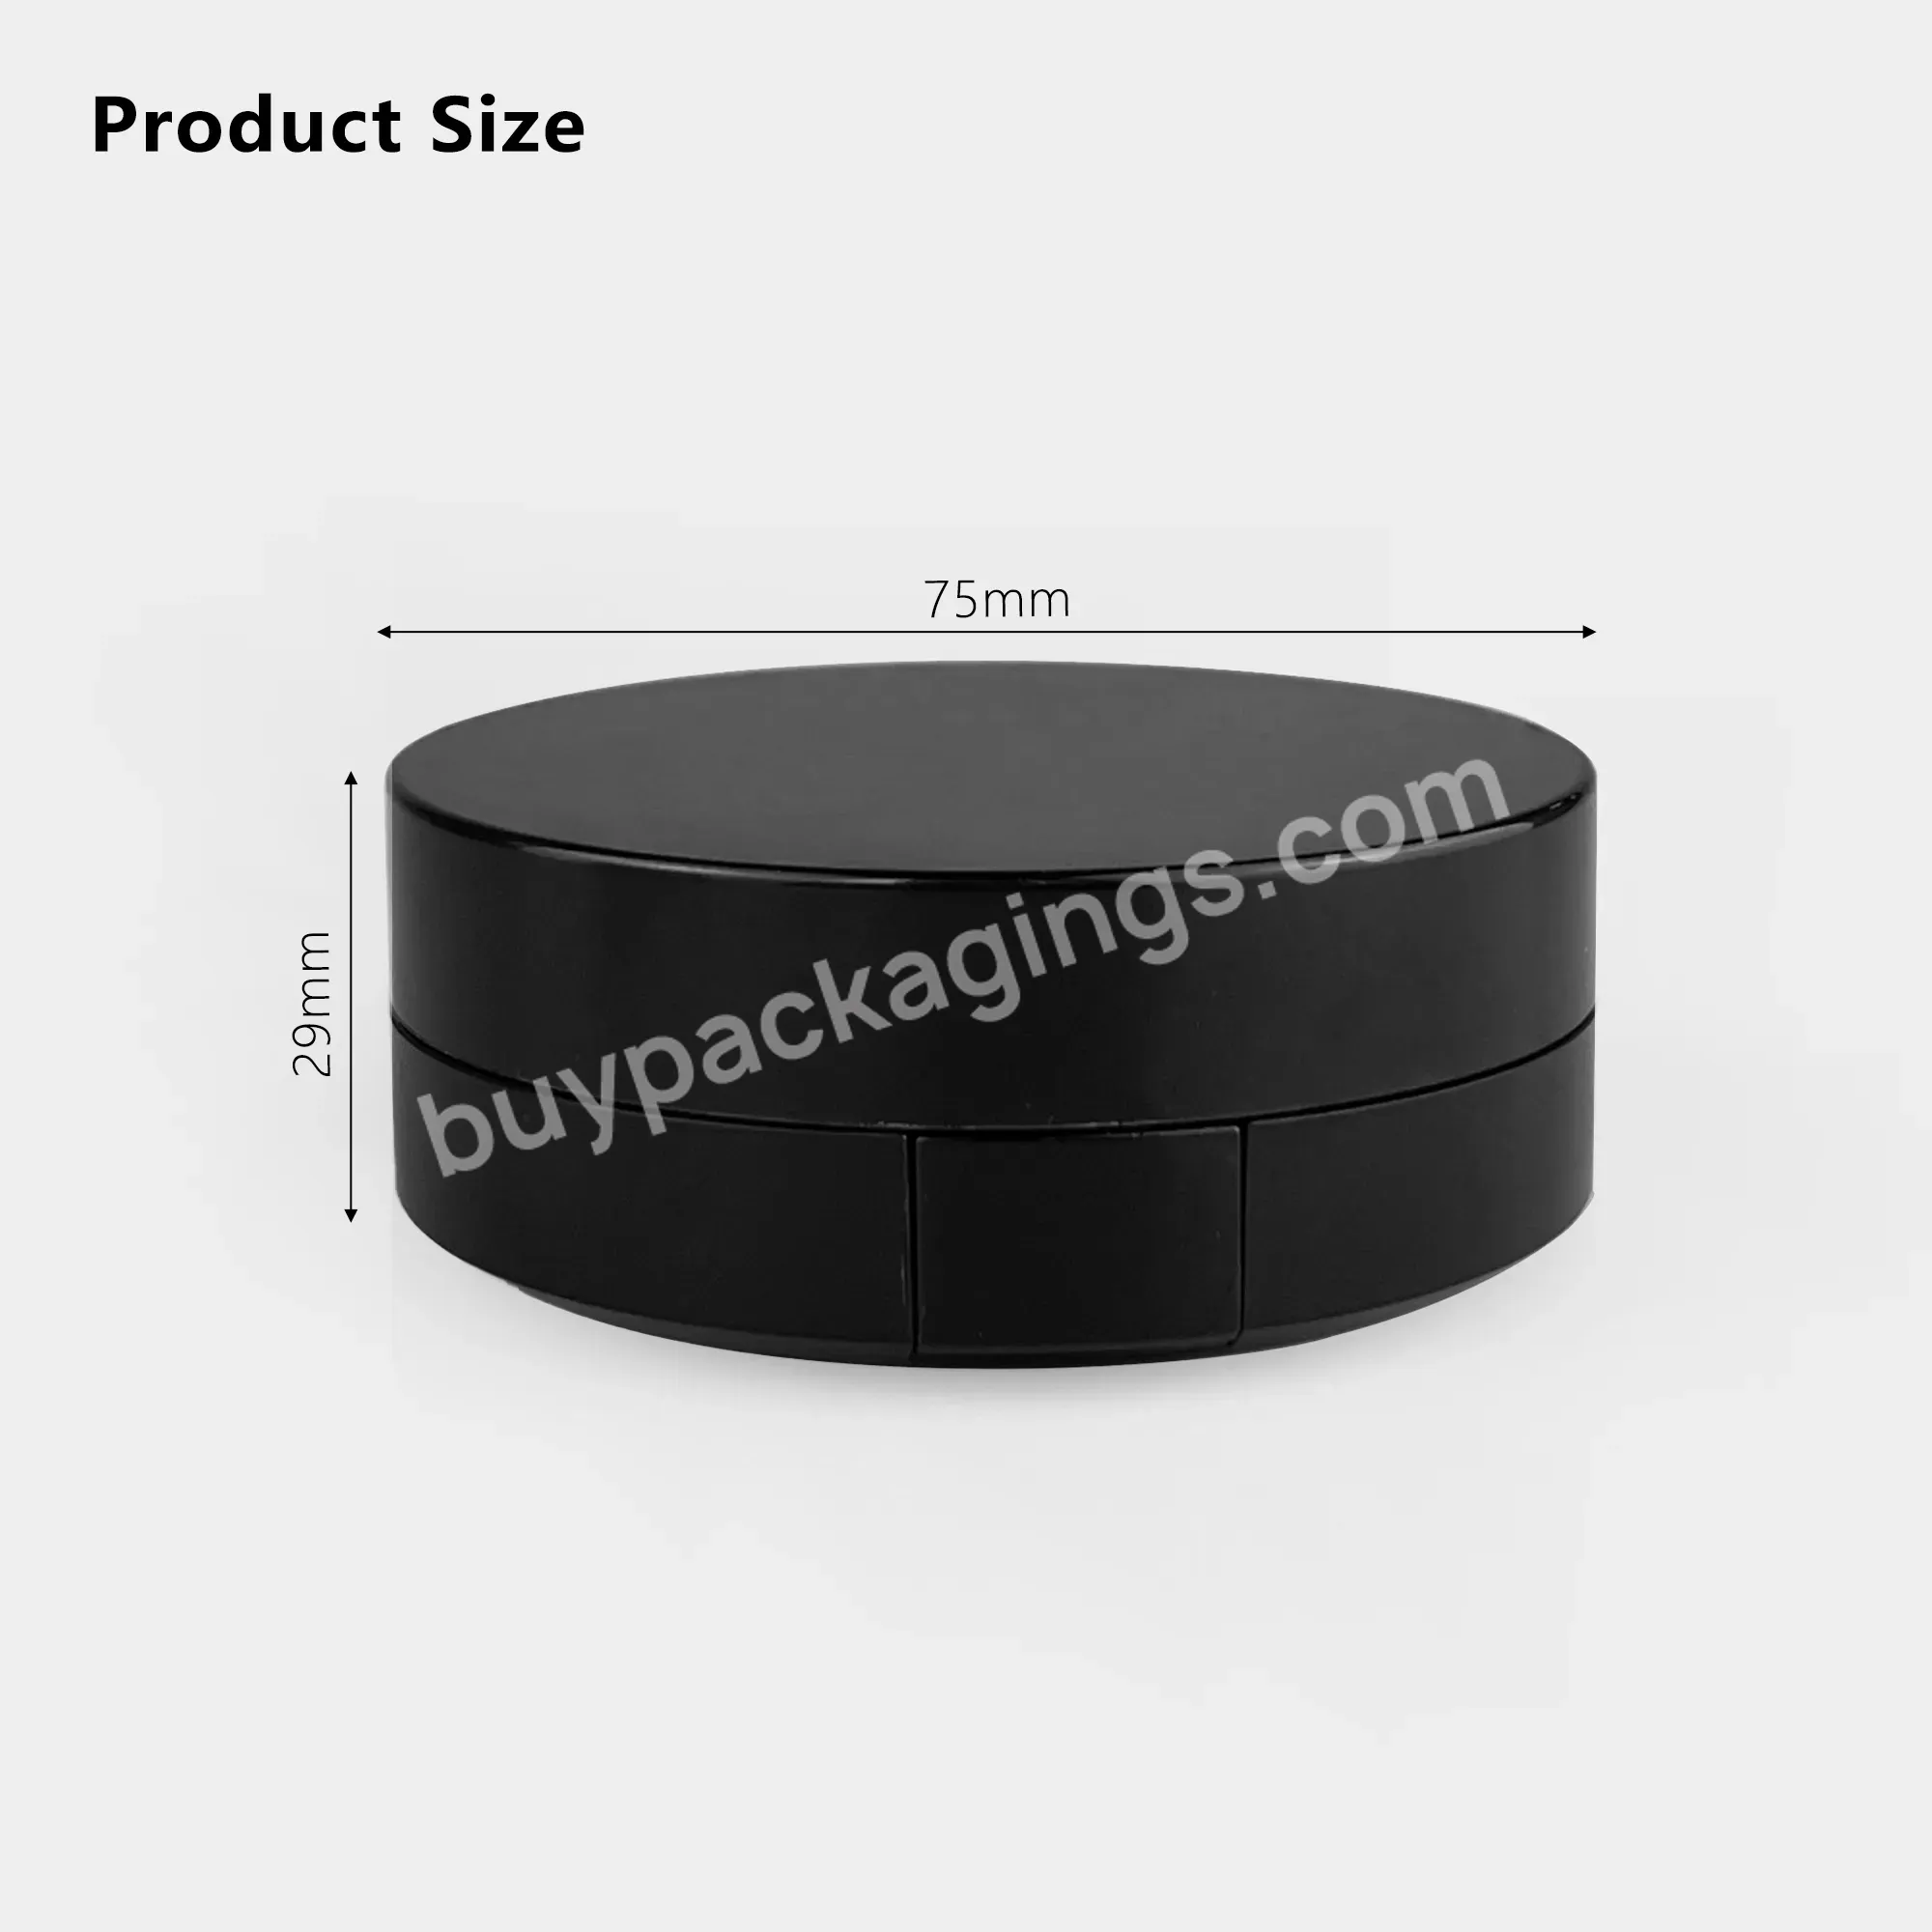 Empty Cosmetic Compact Air Cushion Foundation Powder Case Packaging Personal Care Uv Coating Matt Lamination Accept